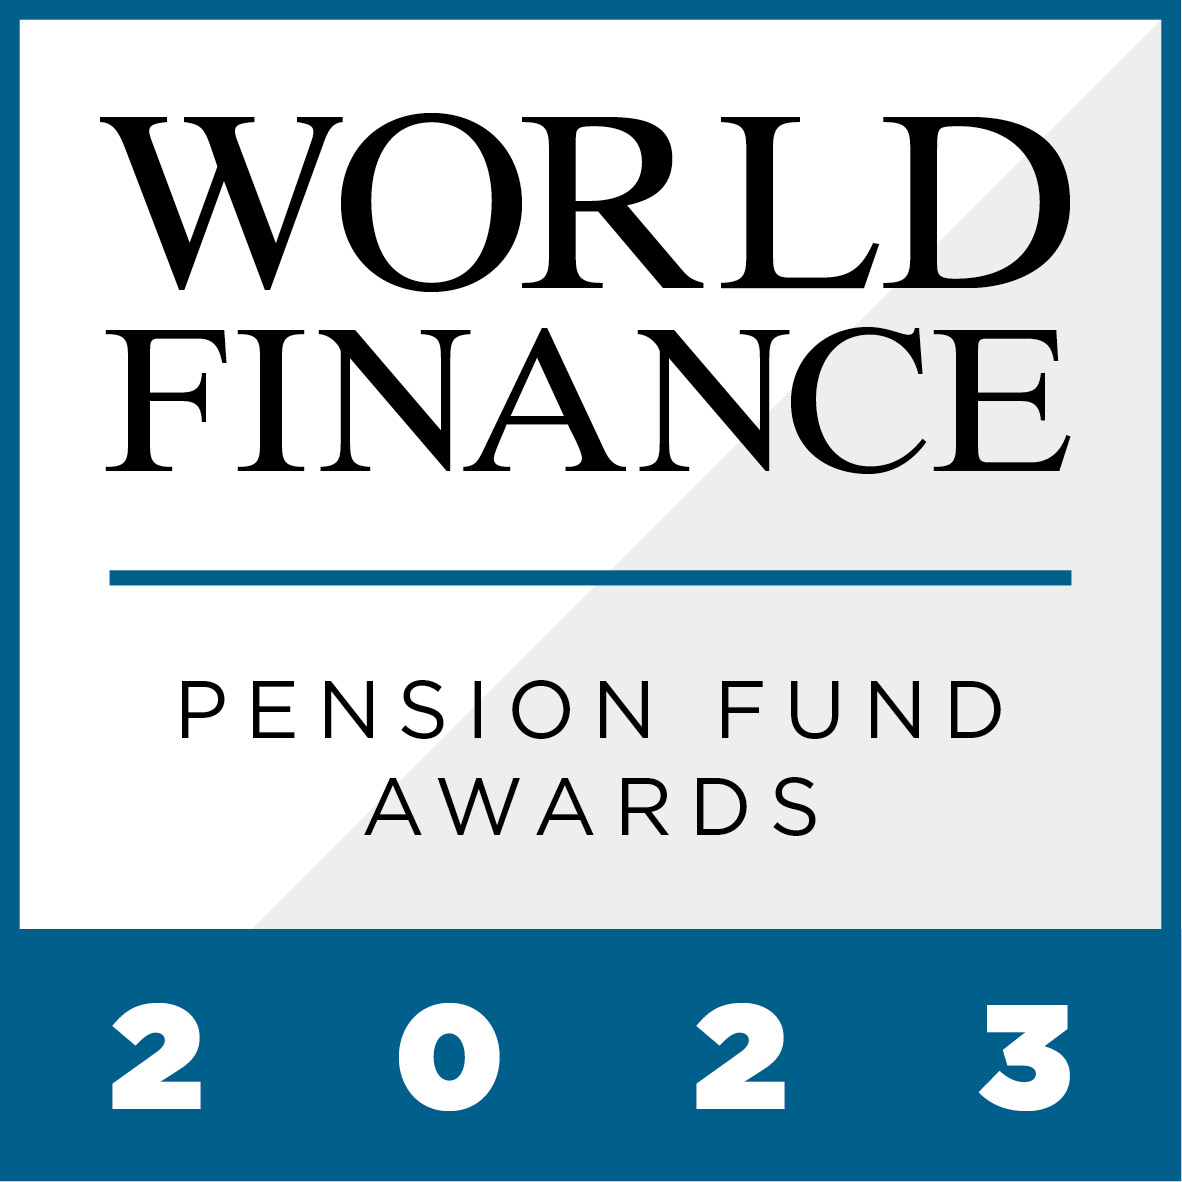 In the World Finance Pension Fund Awards 2023, we recognise those who continue to demonstrate an innovative and dynamic approach in a challenging environment